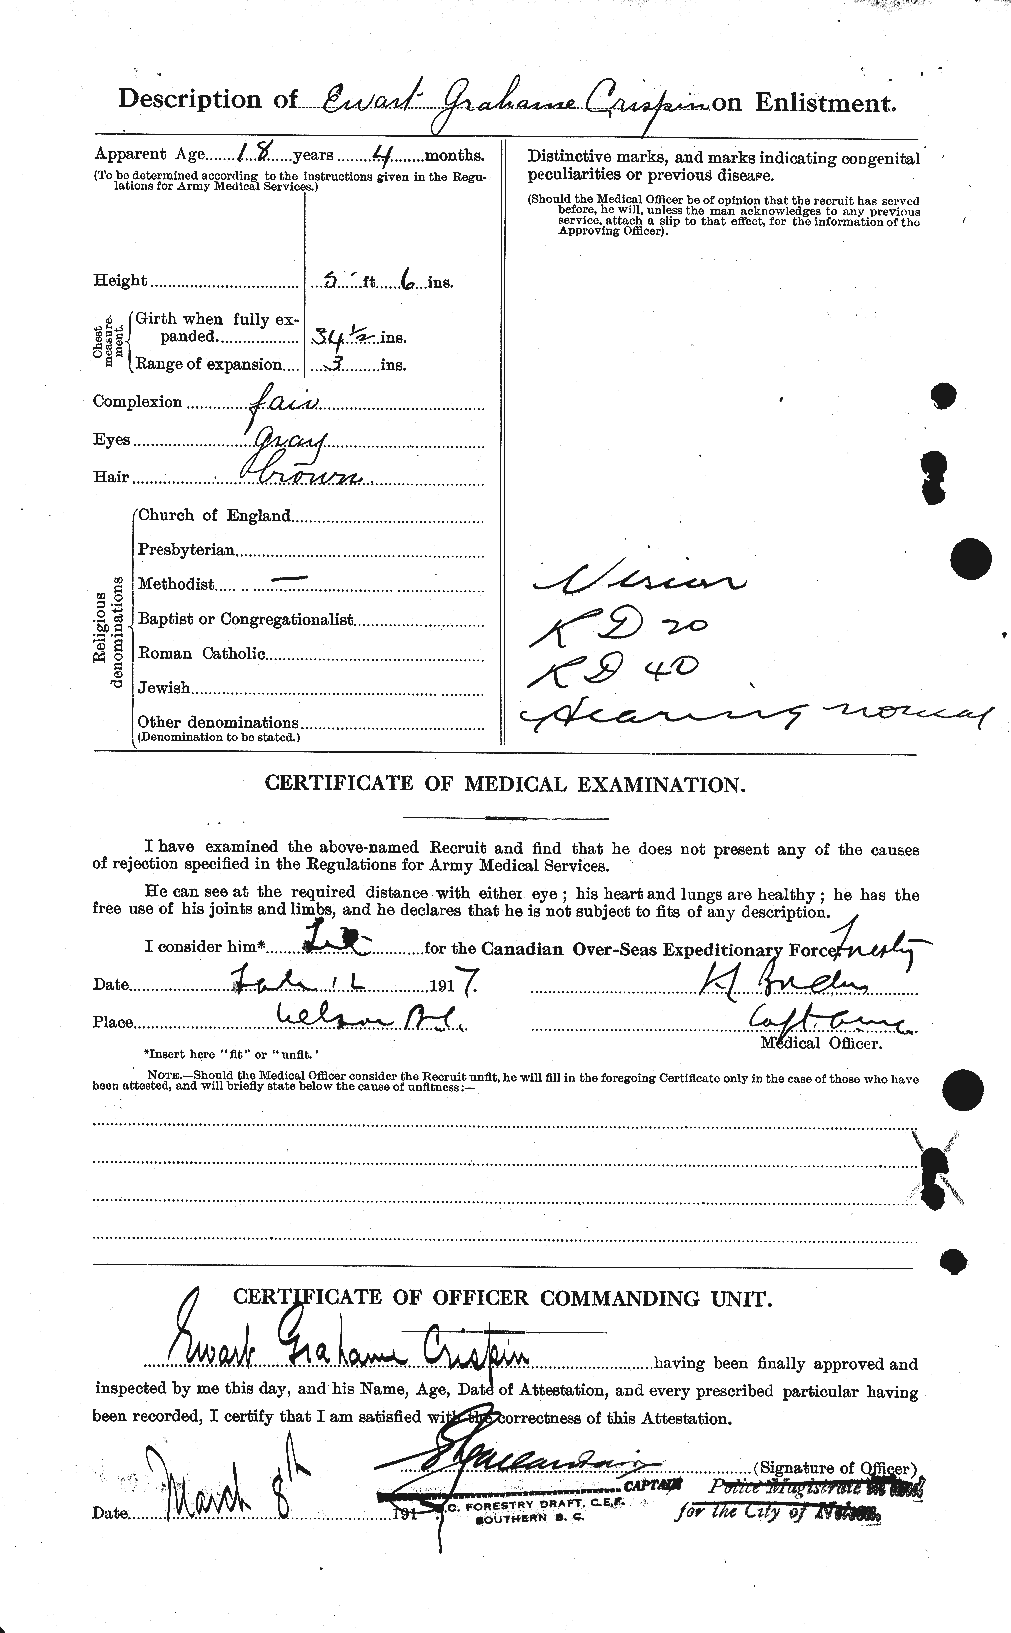 Personnel Records of the First World War - CEF 065360b